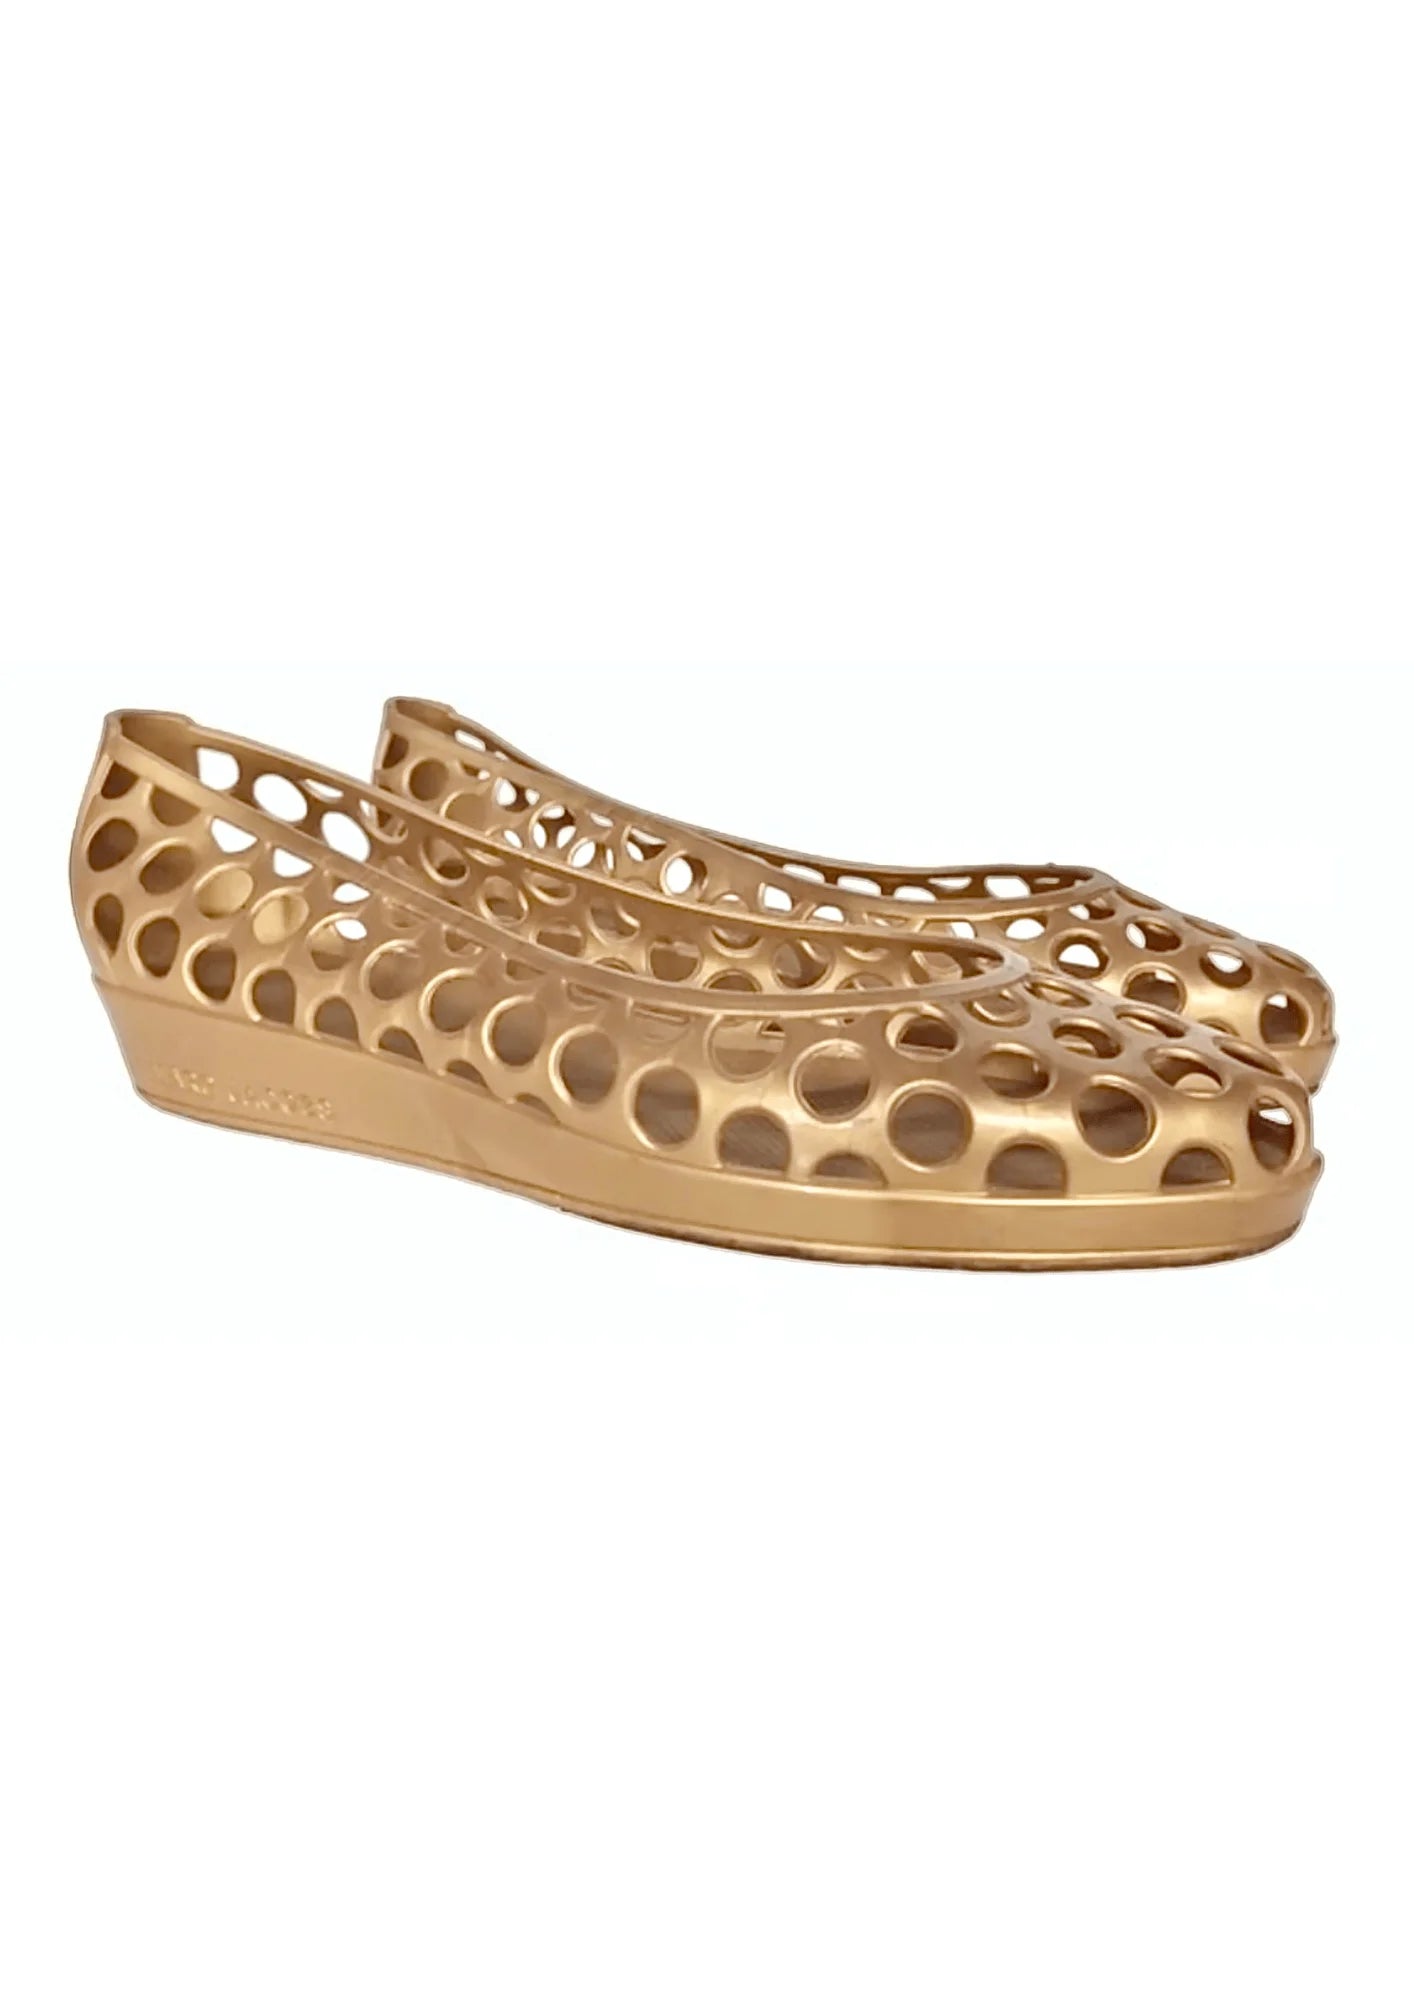 GOLD SURF JELLY PERFORATED SANDALS